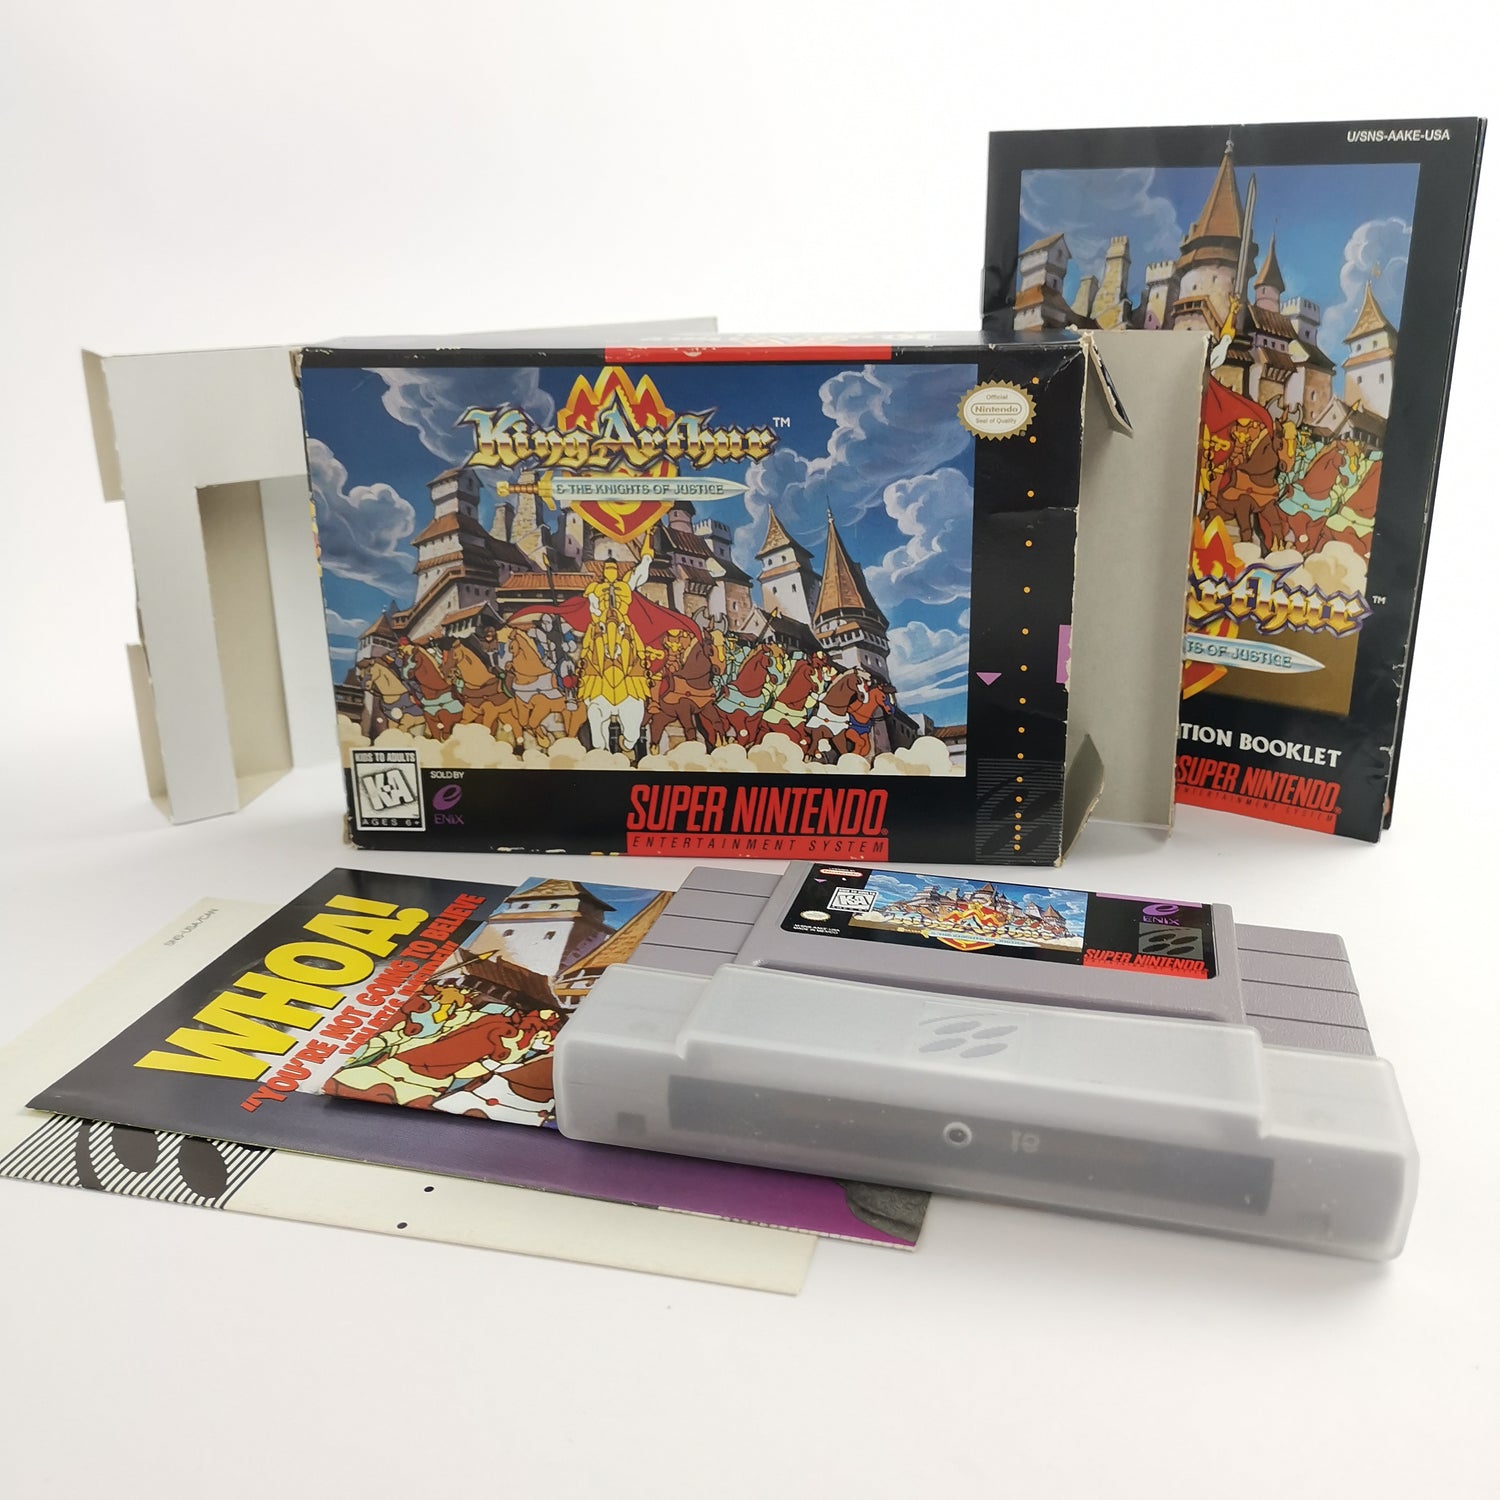 Super Nintendo Game: King Arthur & The Knights of Justice - SNES OVP USA